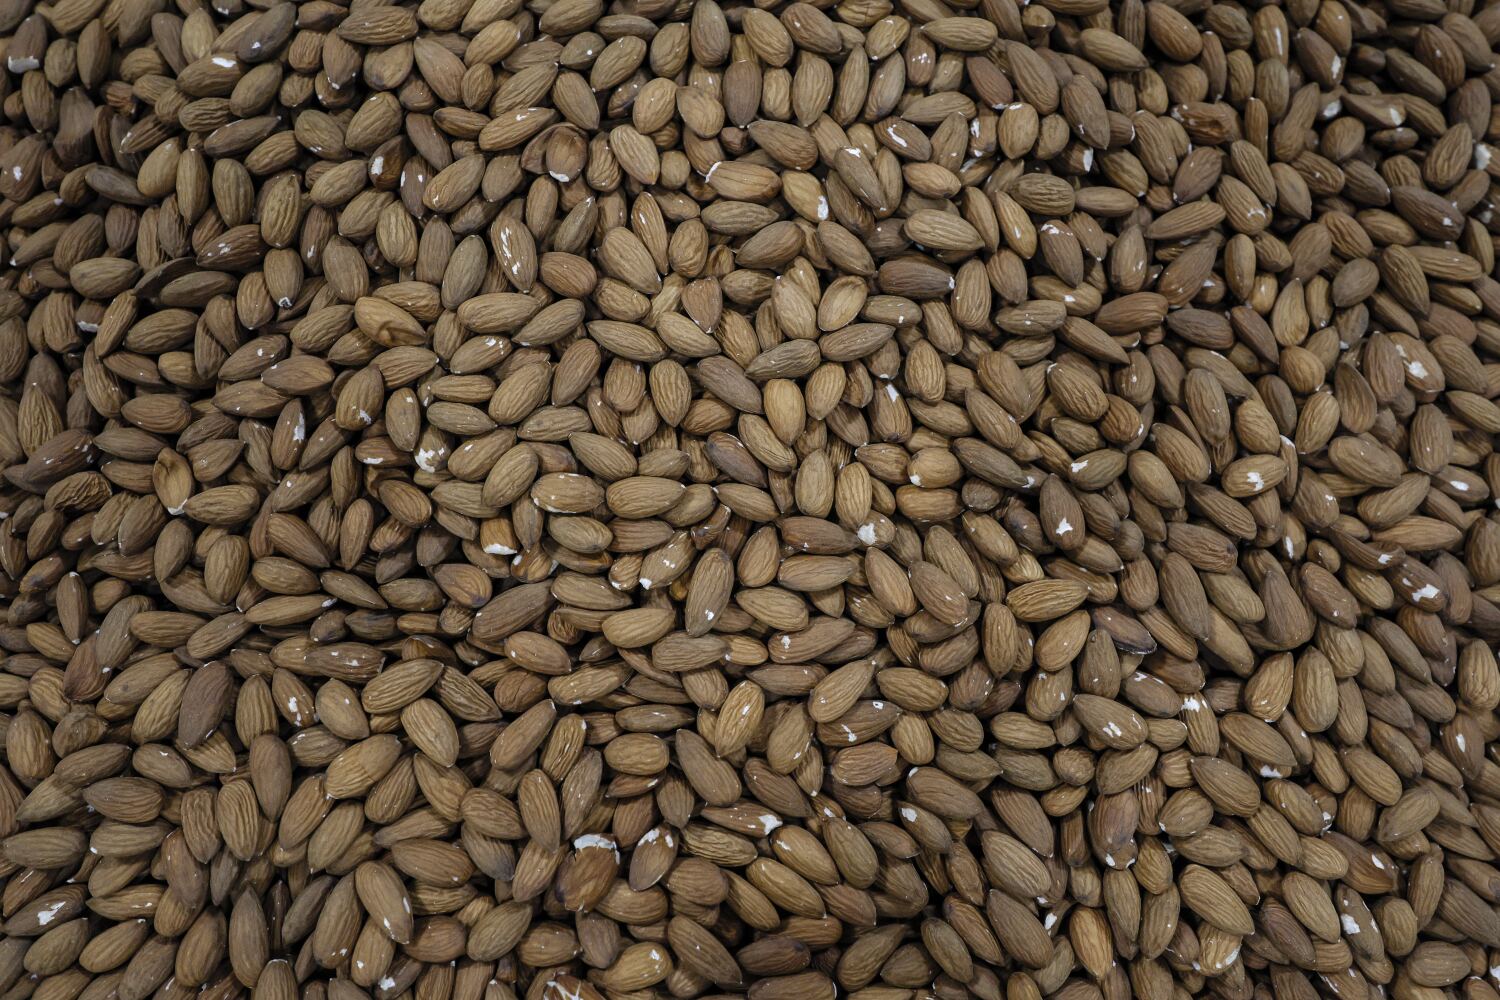 A billion pounds of California almonds stranded at ports amid drought, trade woes